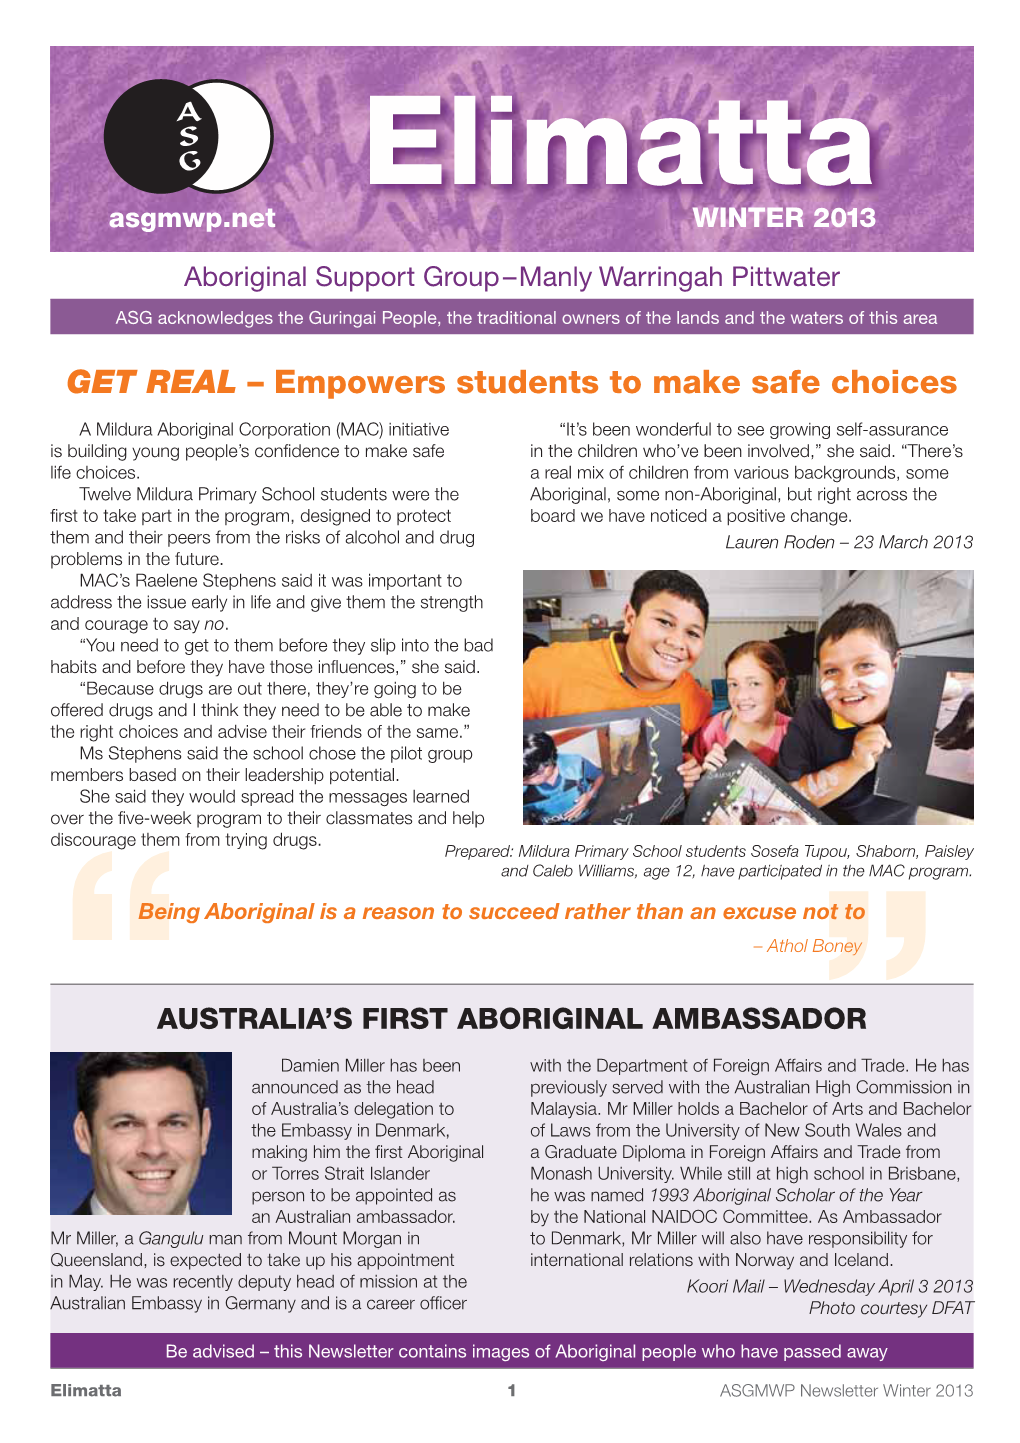 GET REAL – Empowers Students to Make Safe Choices